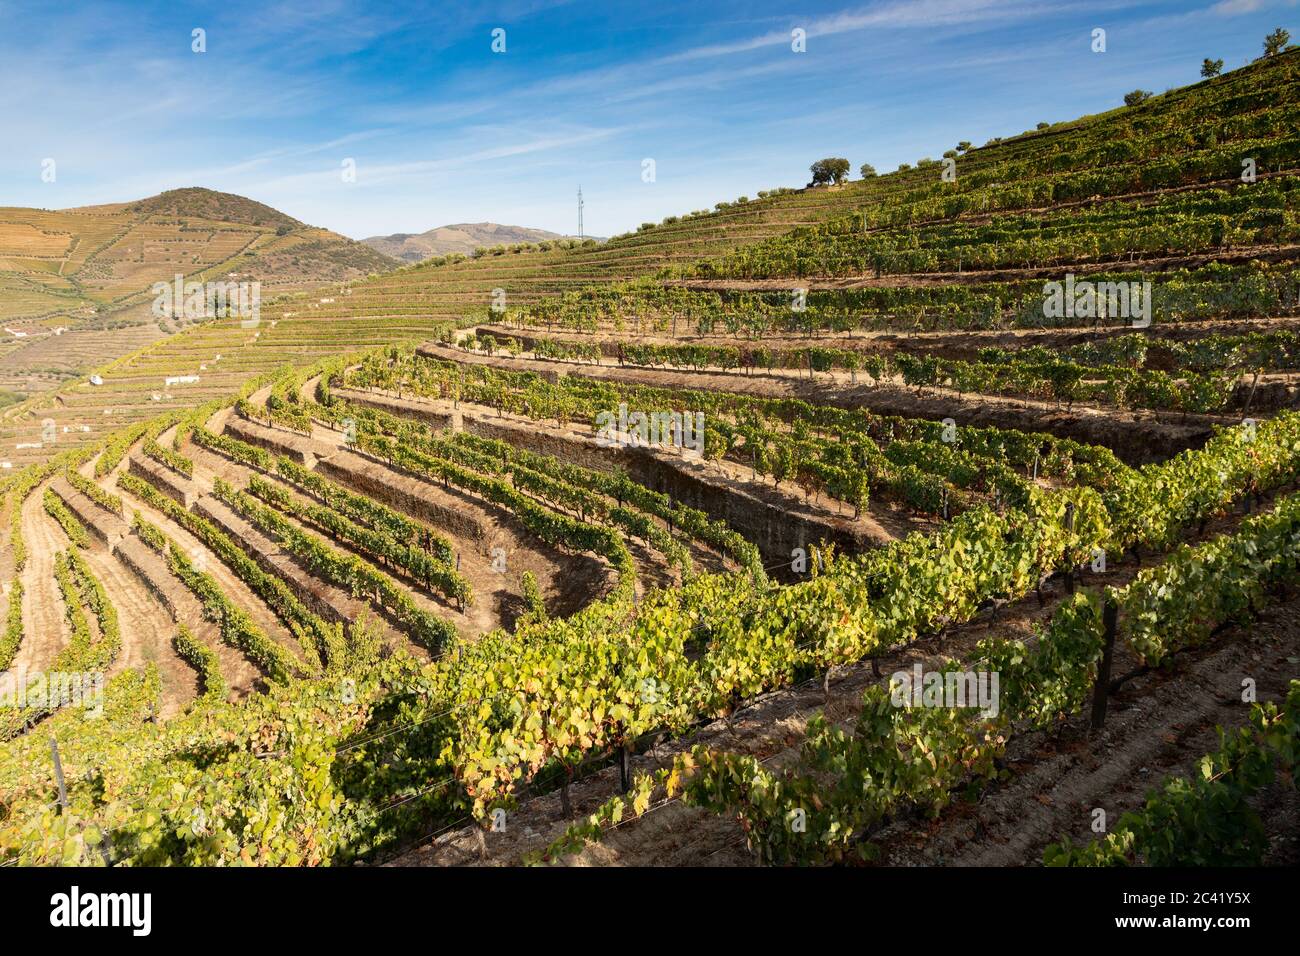 Landscape with grape vines growing on terraces with blue sky Stock Photo